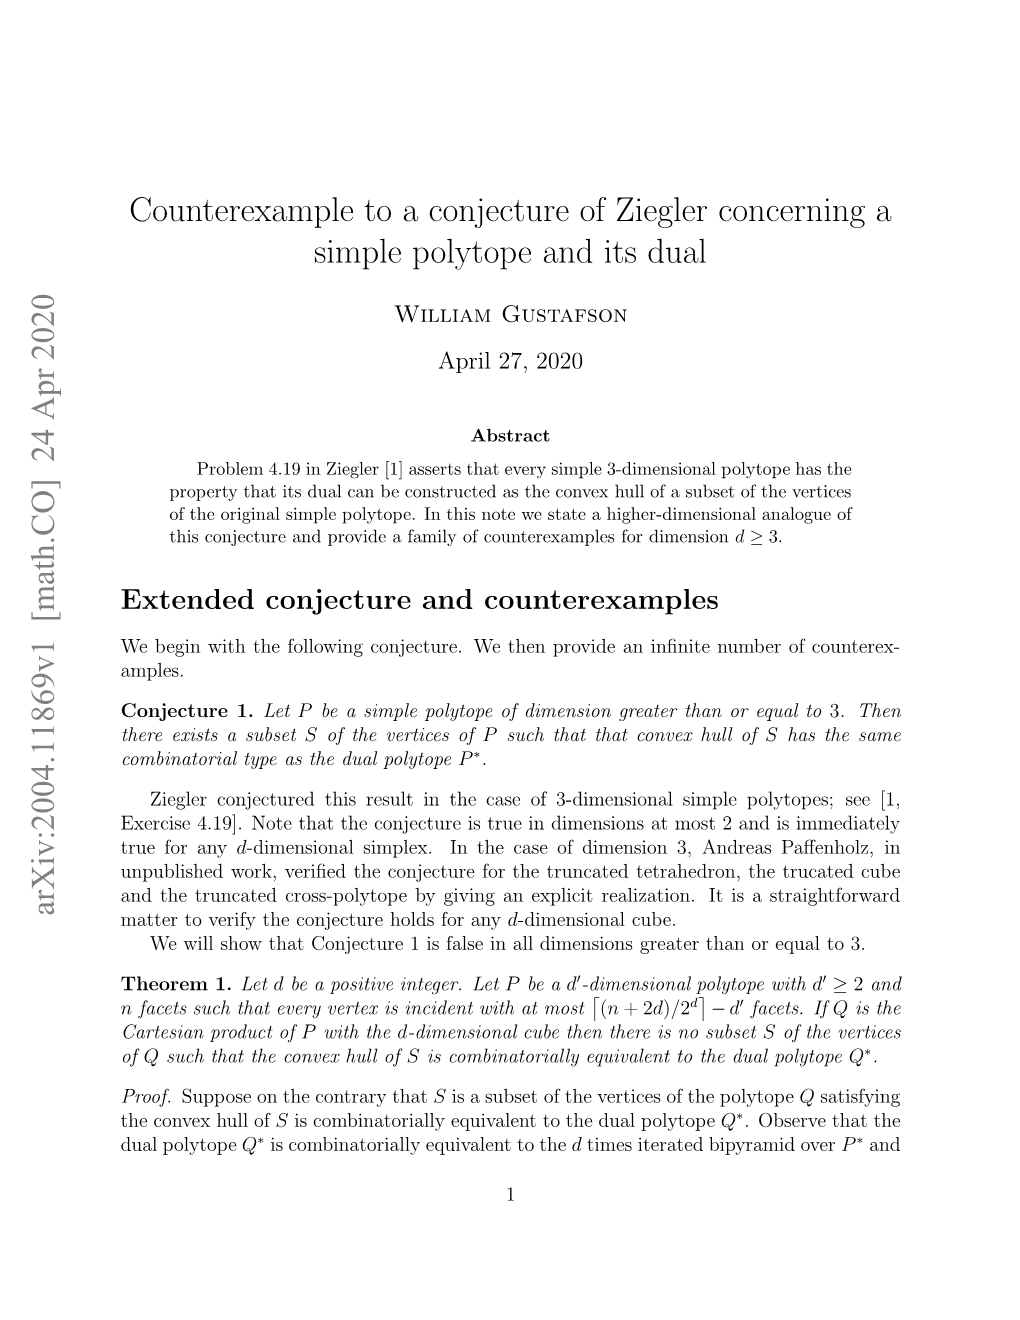 Counterexample to a Conjecture of Ziegler Concerning a Simple